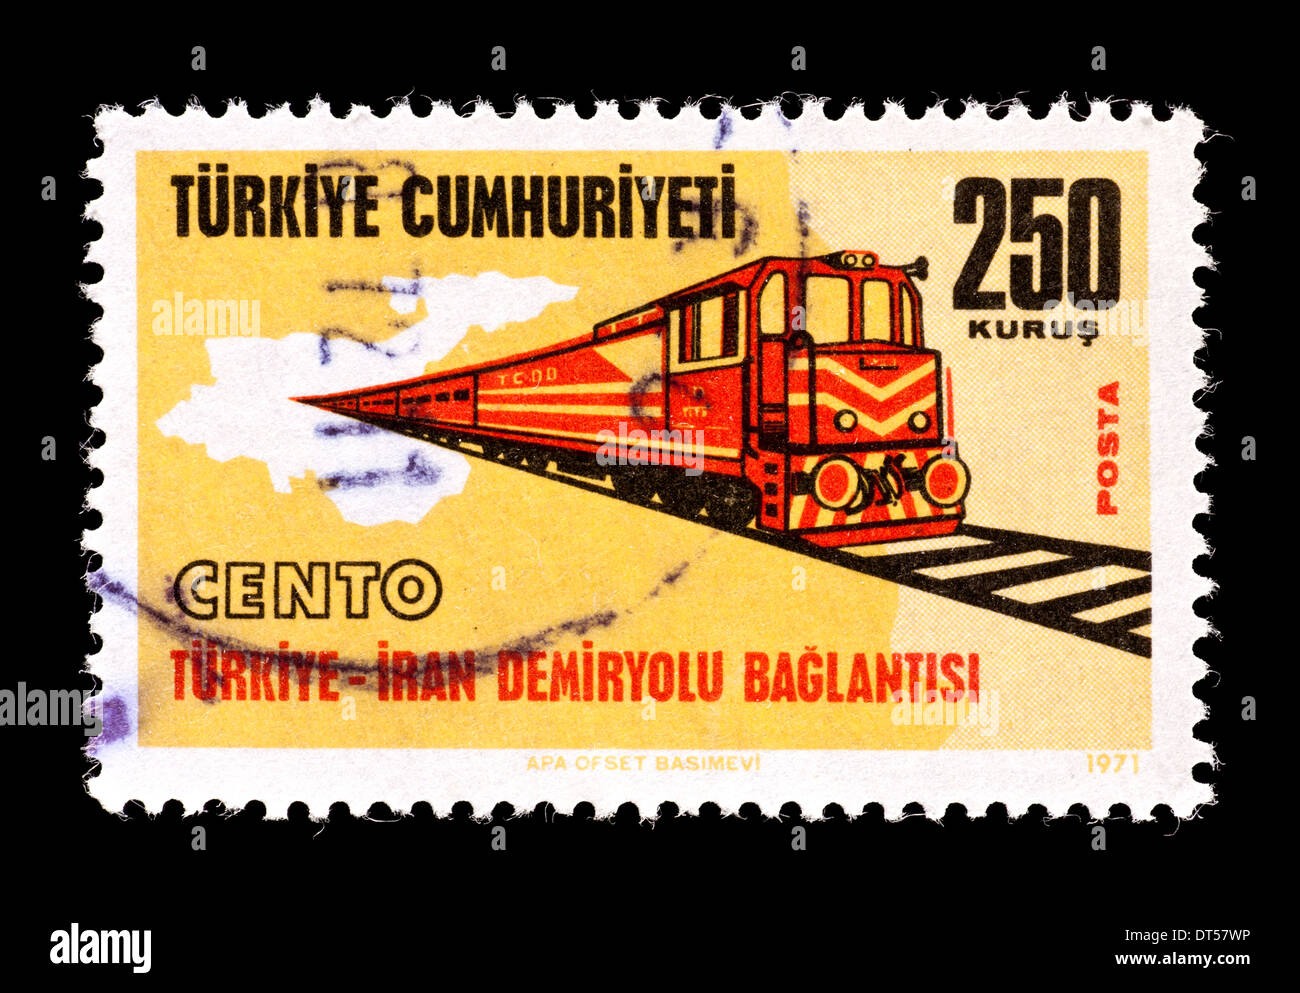 Postage stamp from Turkey depicting the Turkey-Iran railroad and train engine. Stock Photo